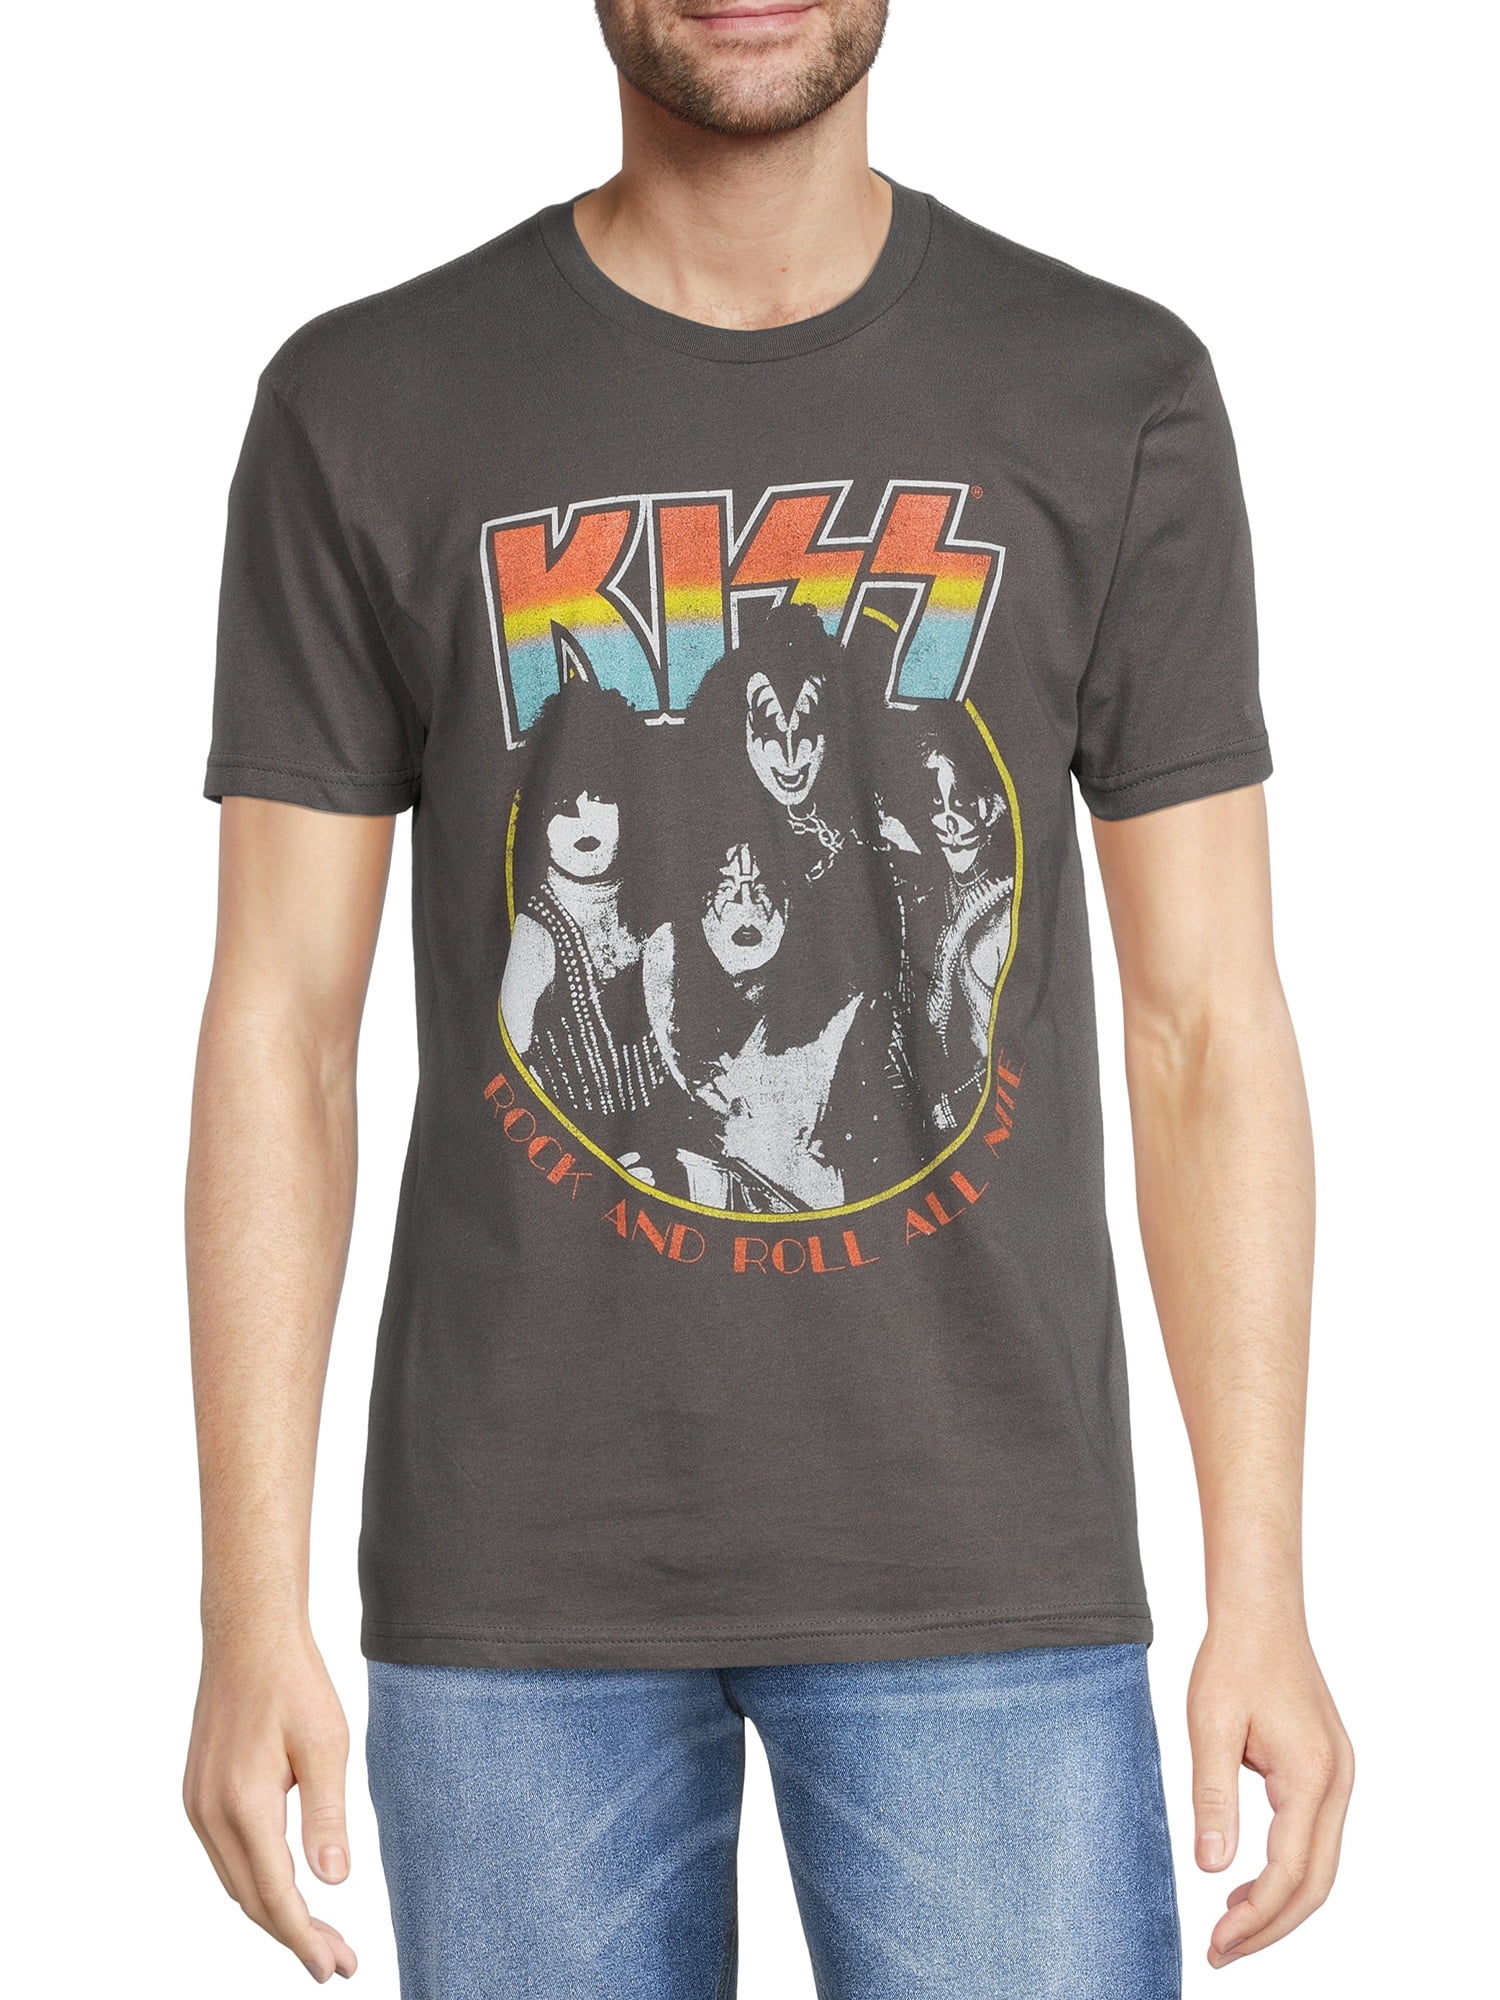 Kiss Men's Group Band T-Shirt with Short Sleeves